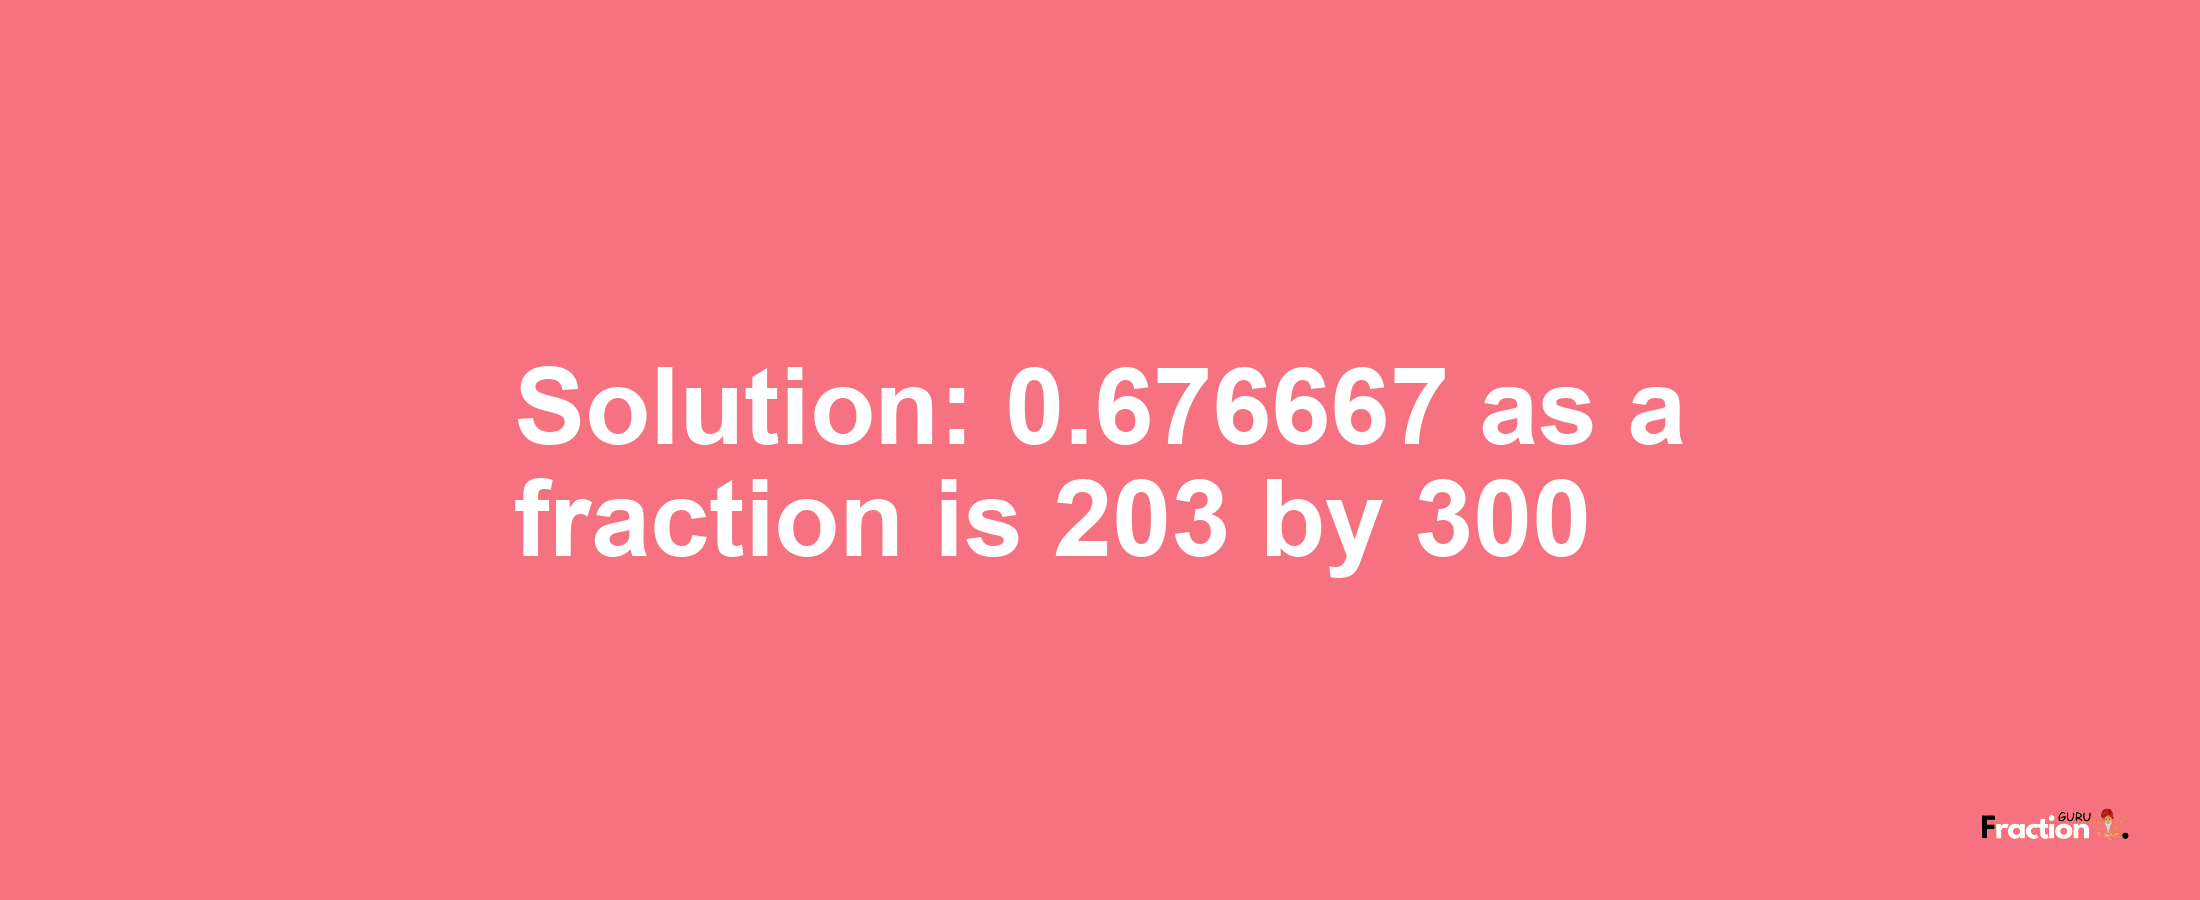 Solution:0.676667 as a fraction is 203/300